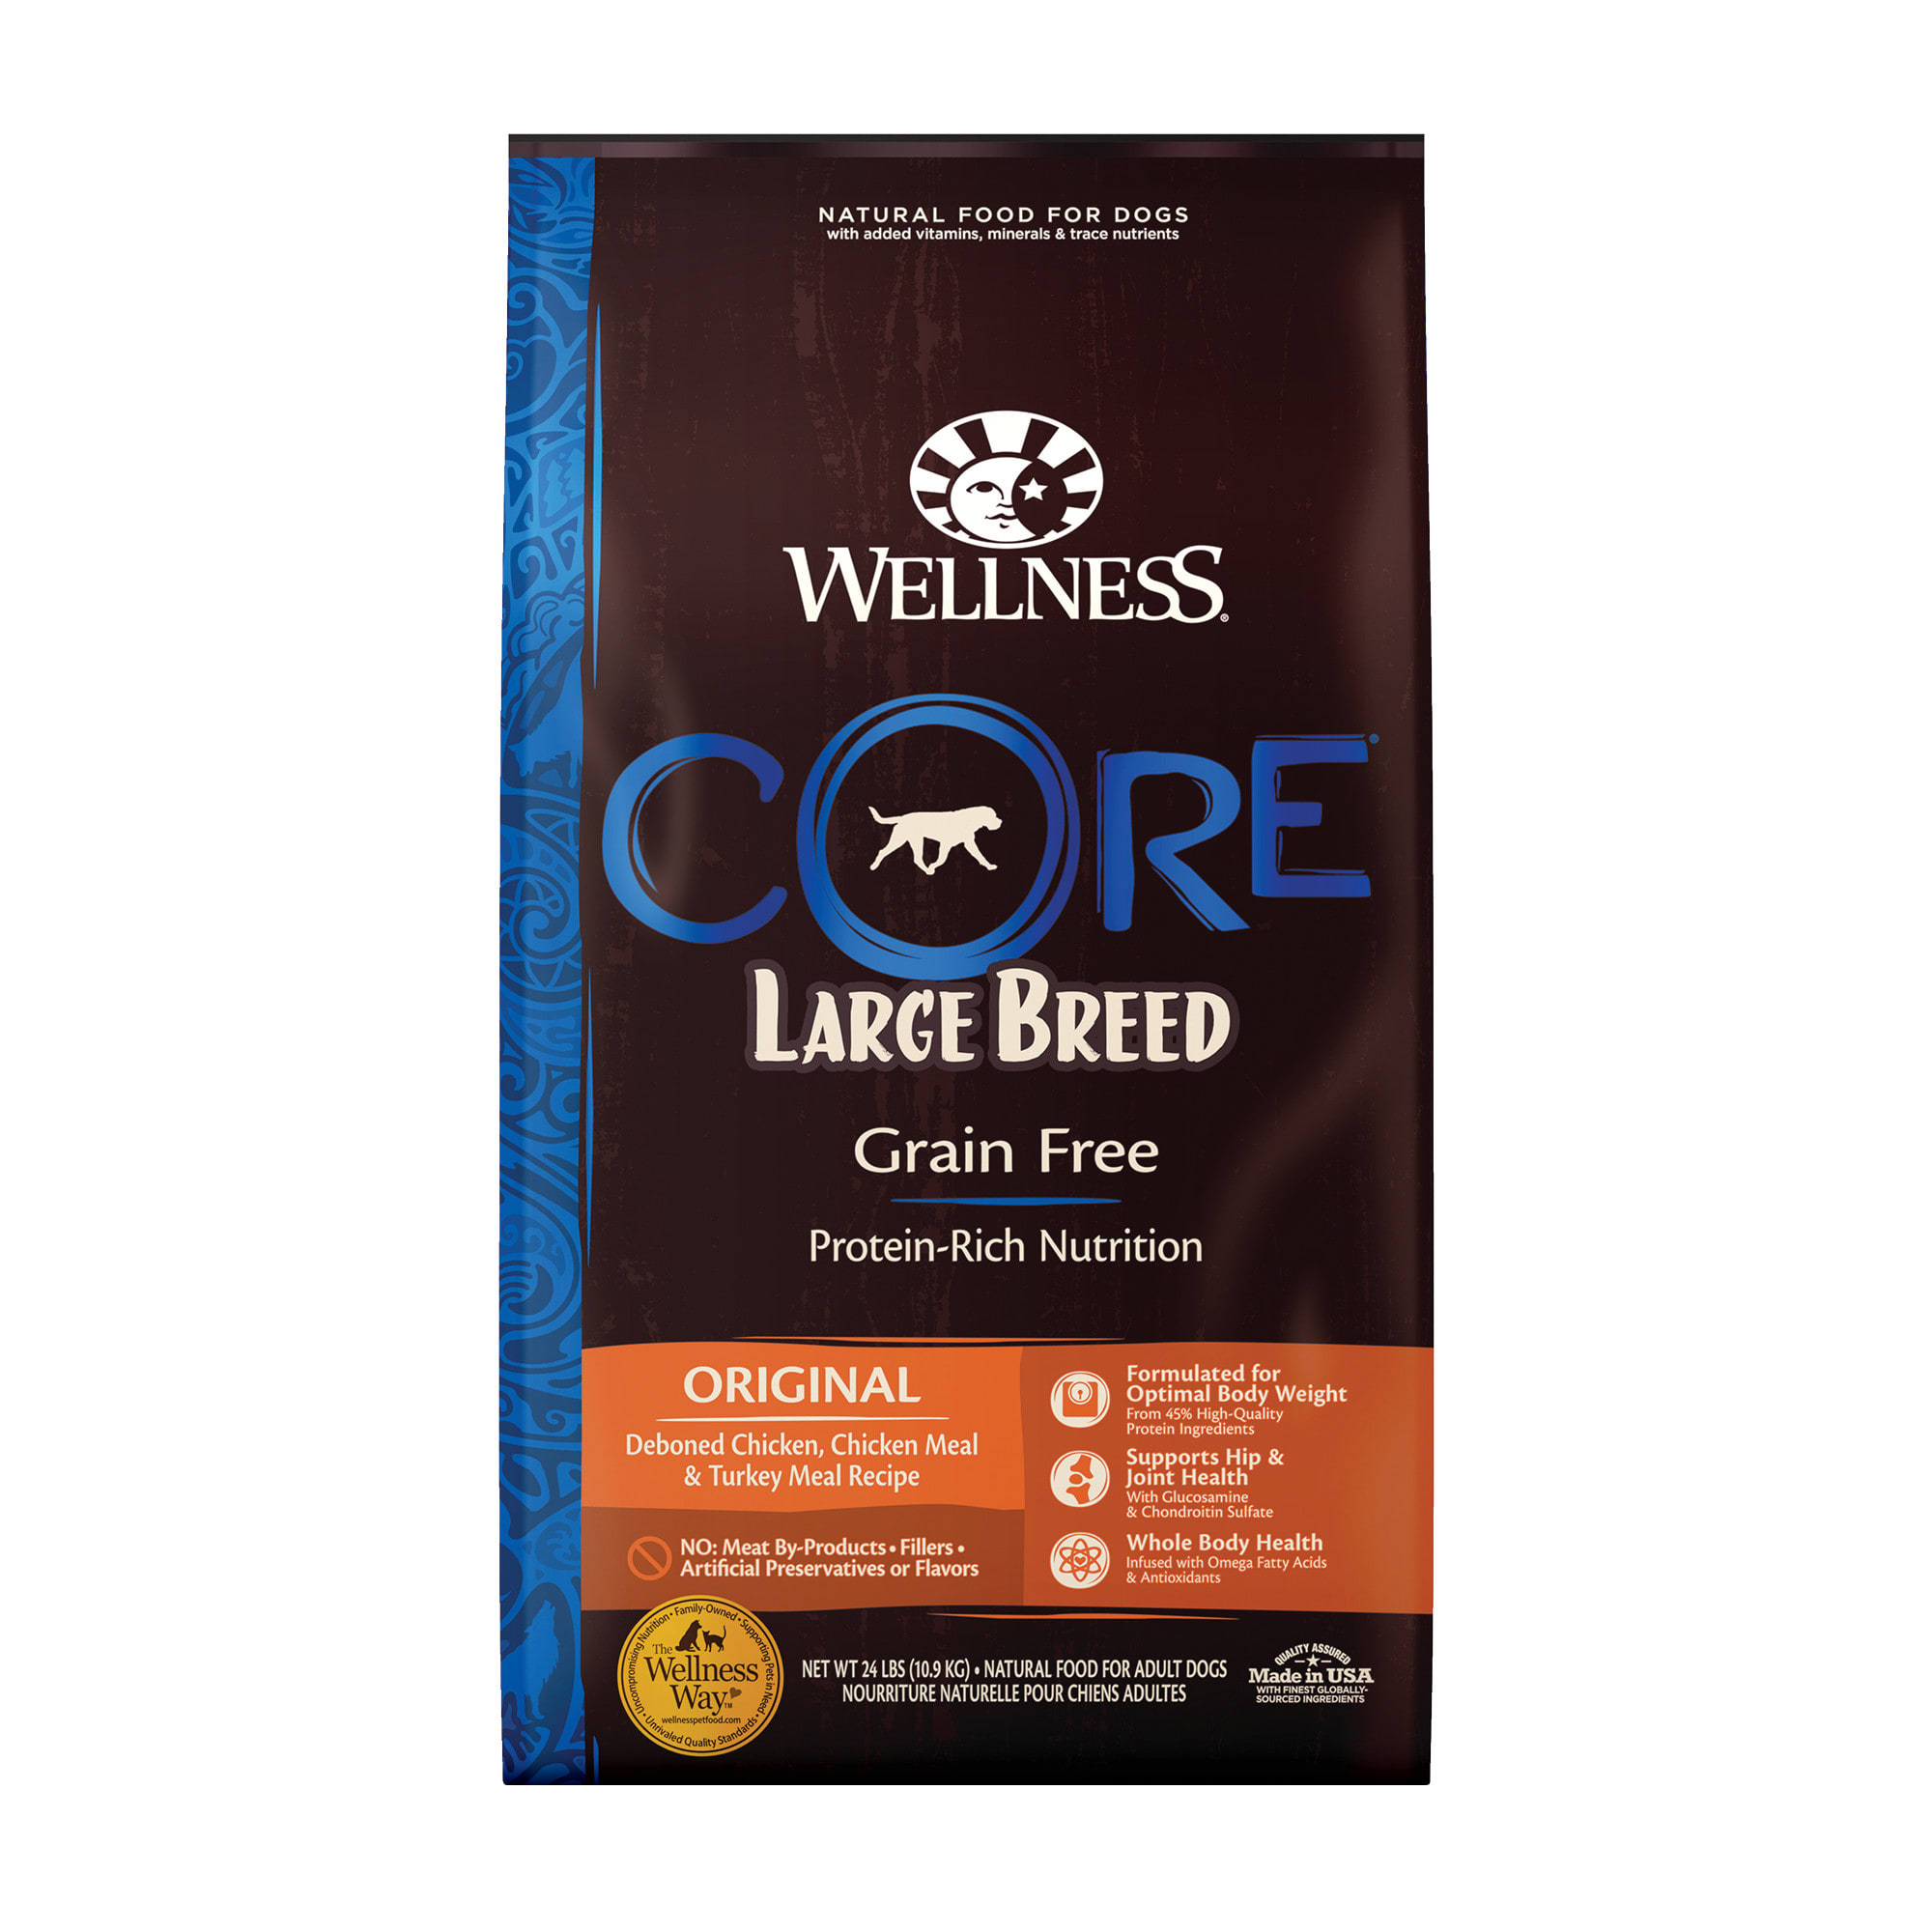 Wellness CORE Natural Grain Free Large Breed Dry Dog Food, 24 lbs. Petco